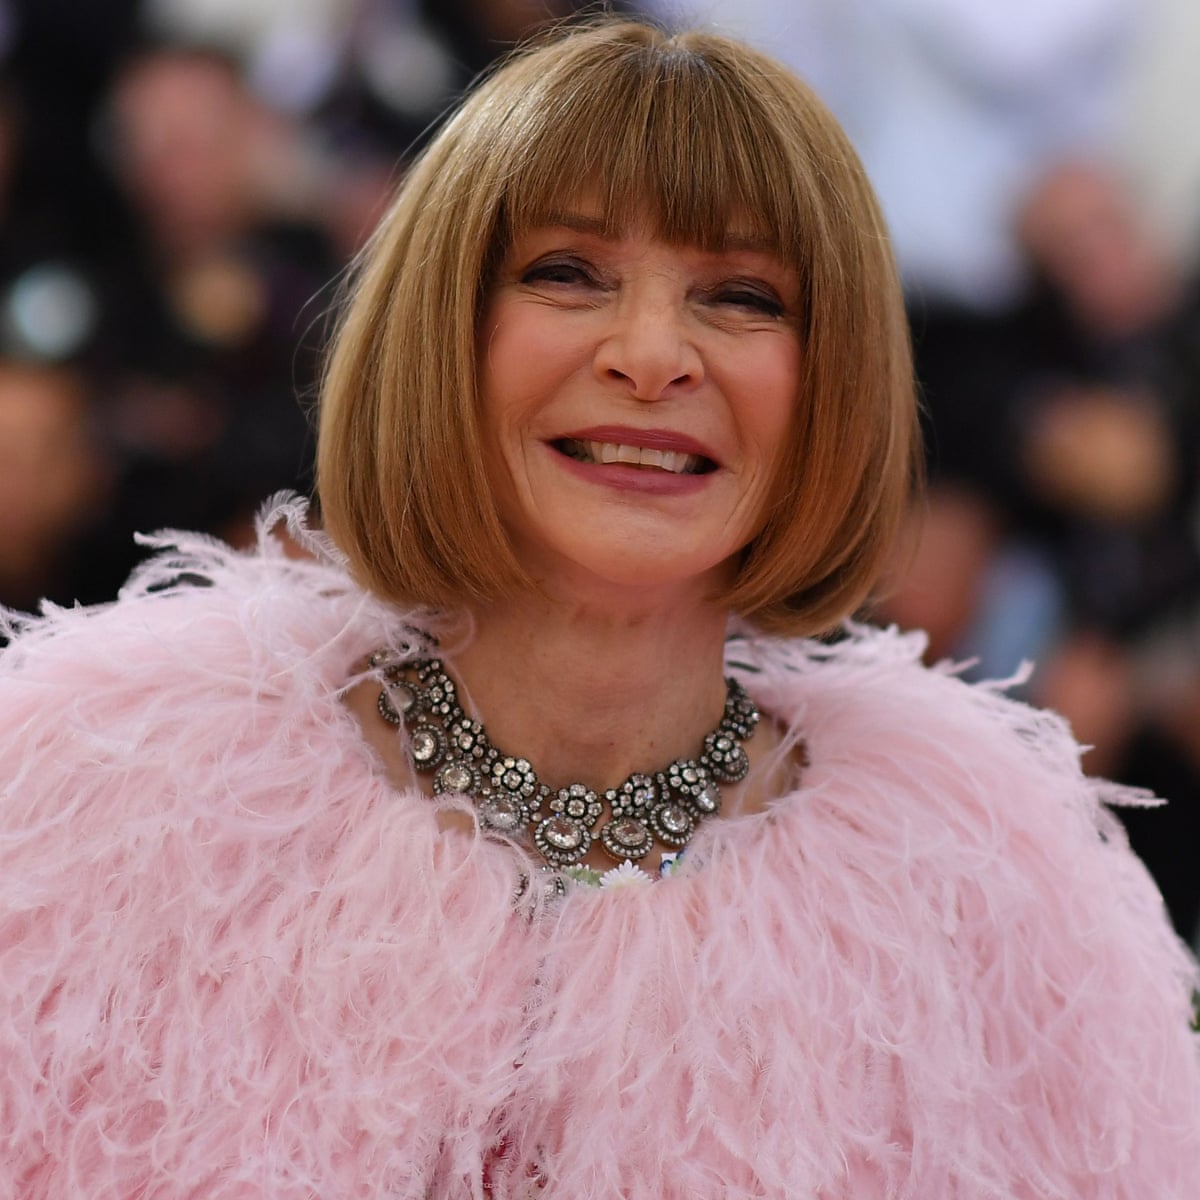 Vogue Editor Anna Wintour Under Fire For Being Icy Towards Mags